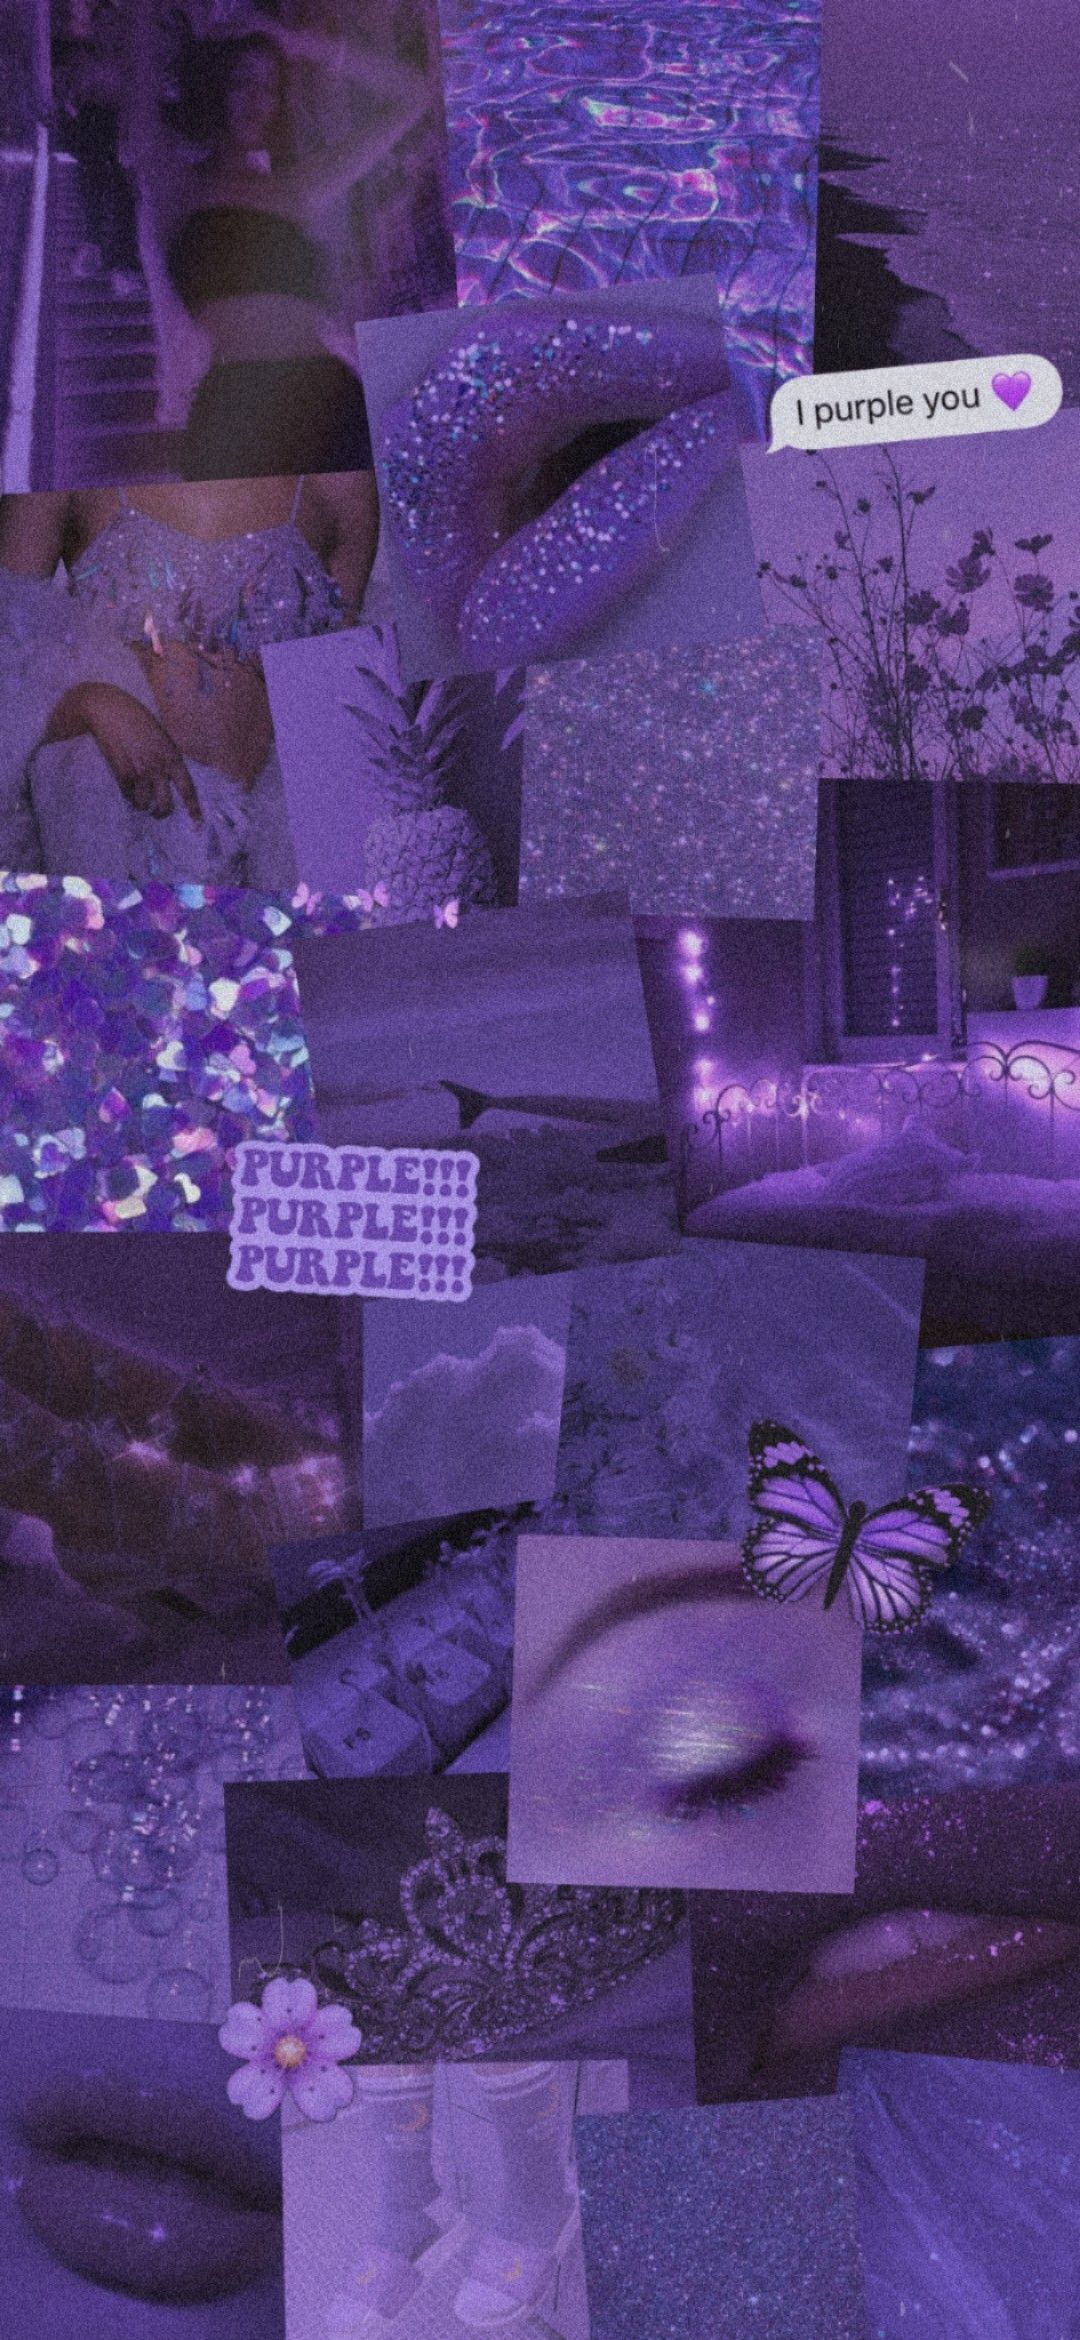 A collage of pictures with purple backgrounds - Purple, glitter